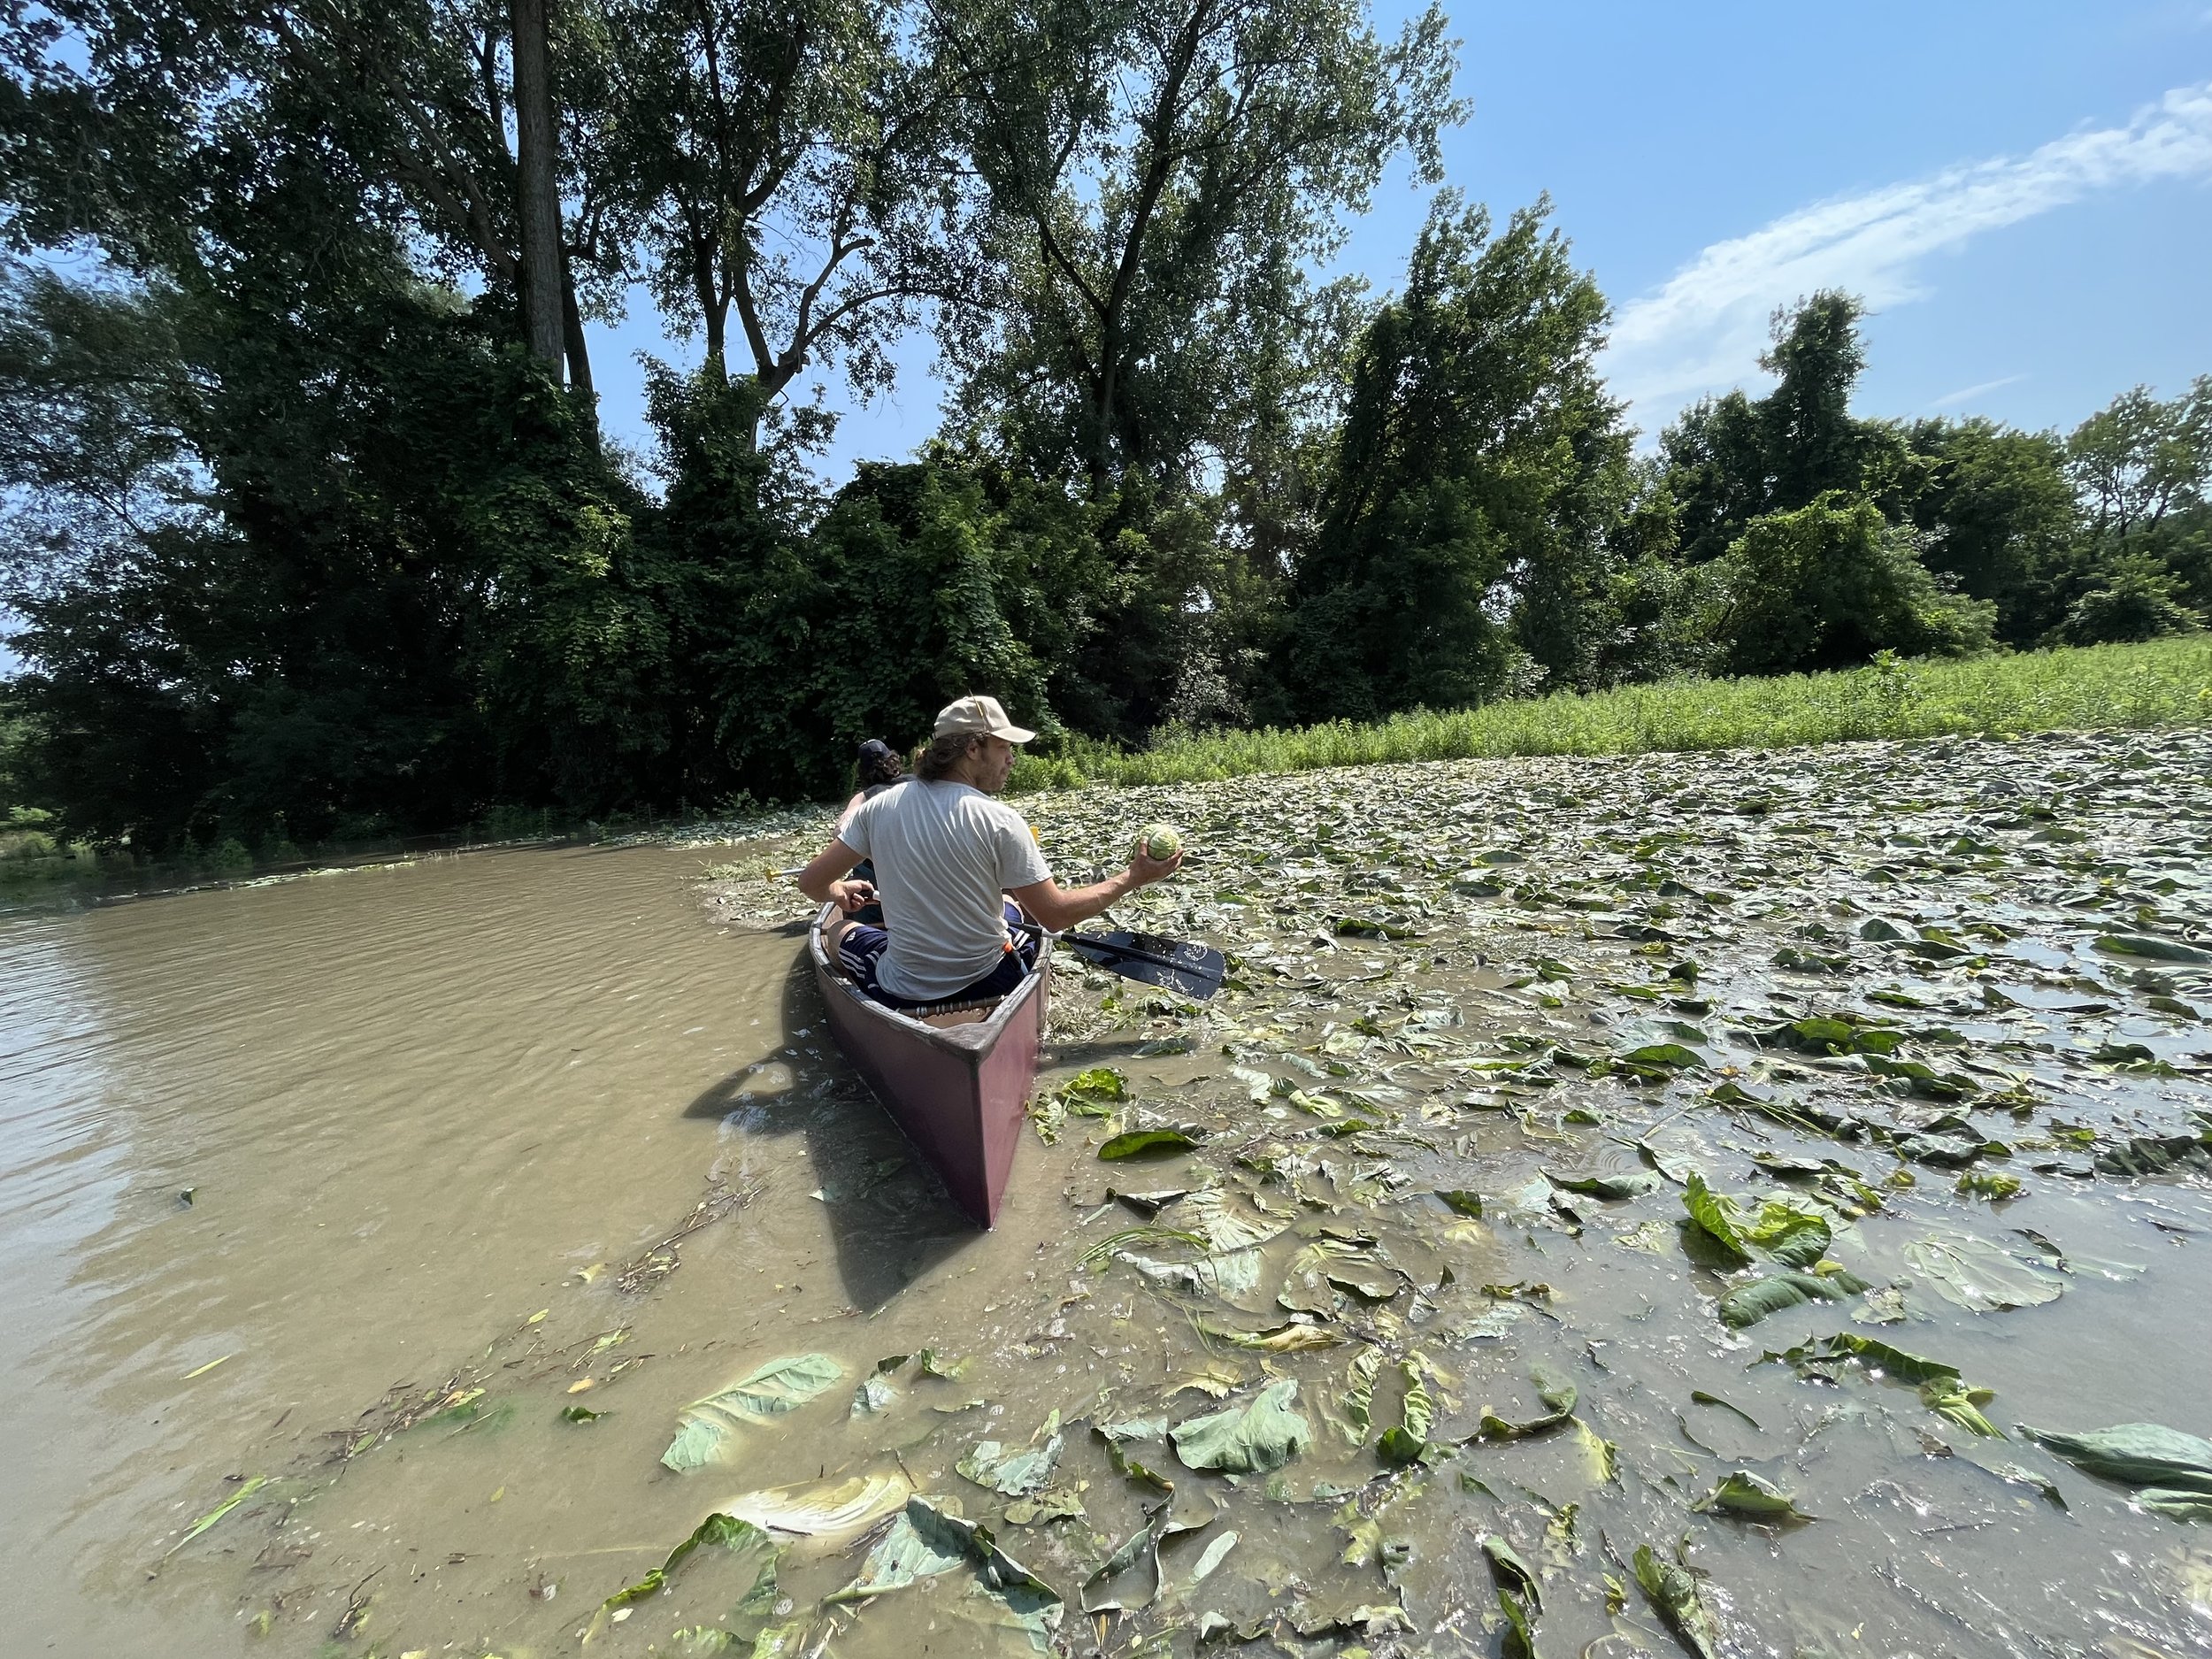  Farmers and staff paddled through floodwaters on July 11th to assess damage, including this submerged field of cabbage. 